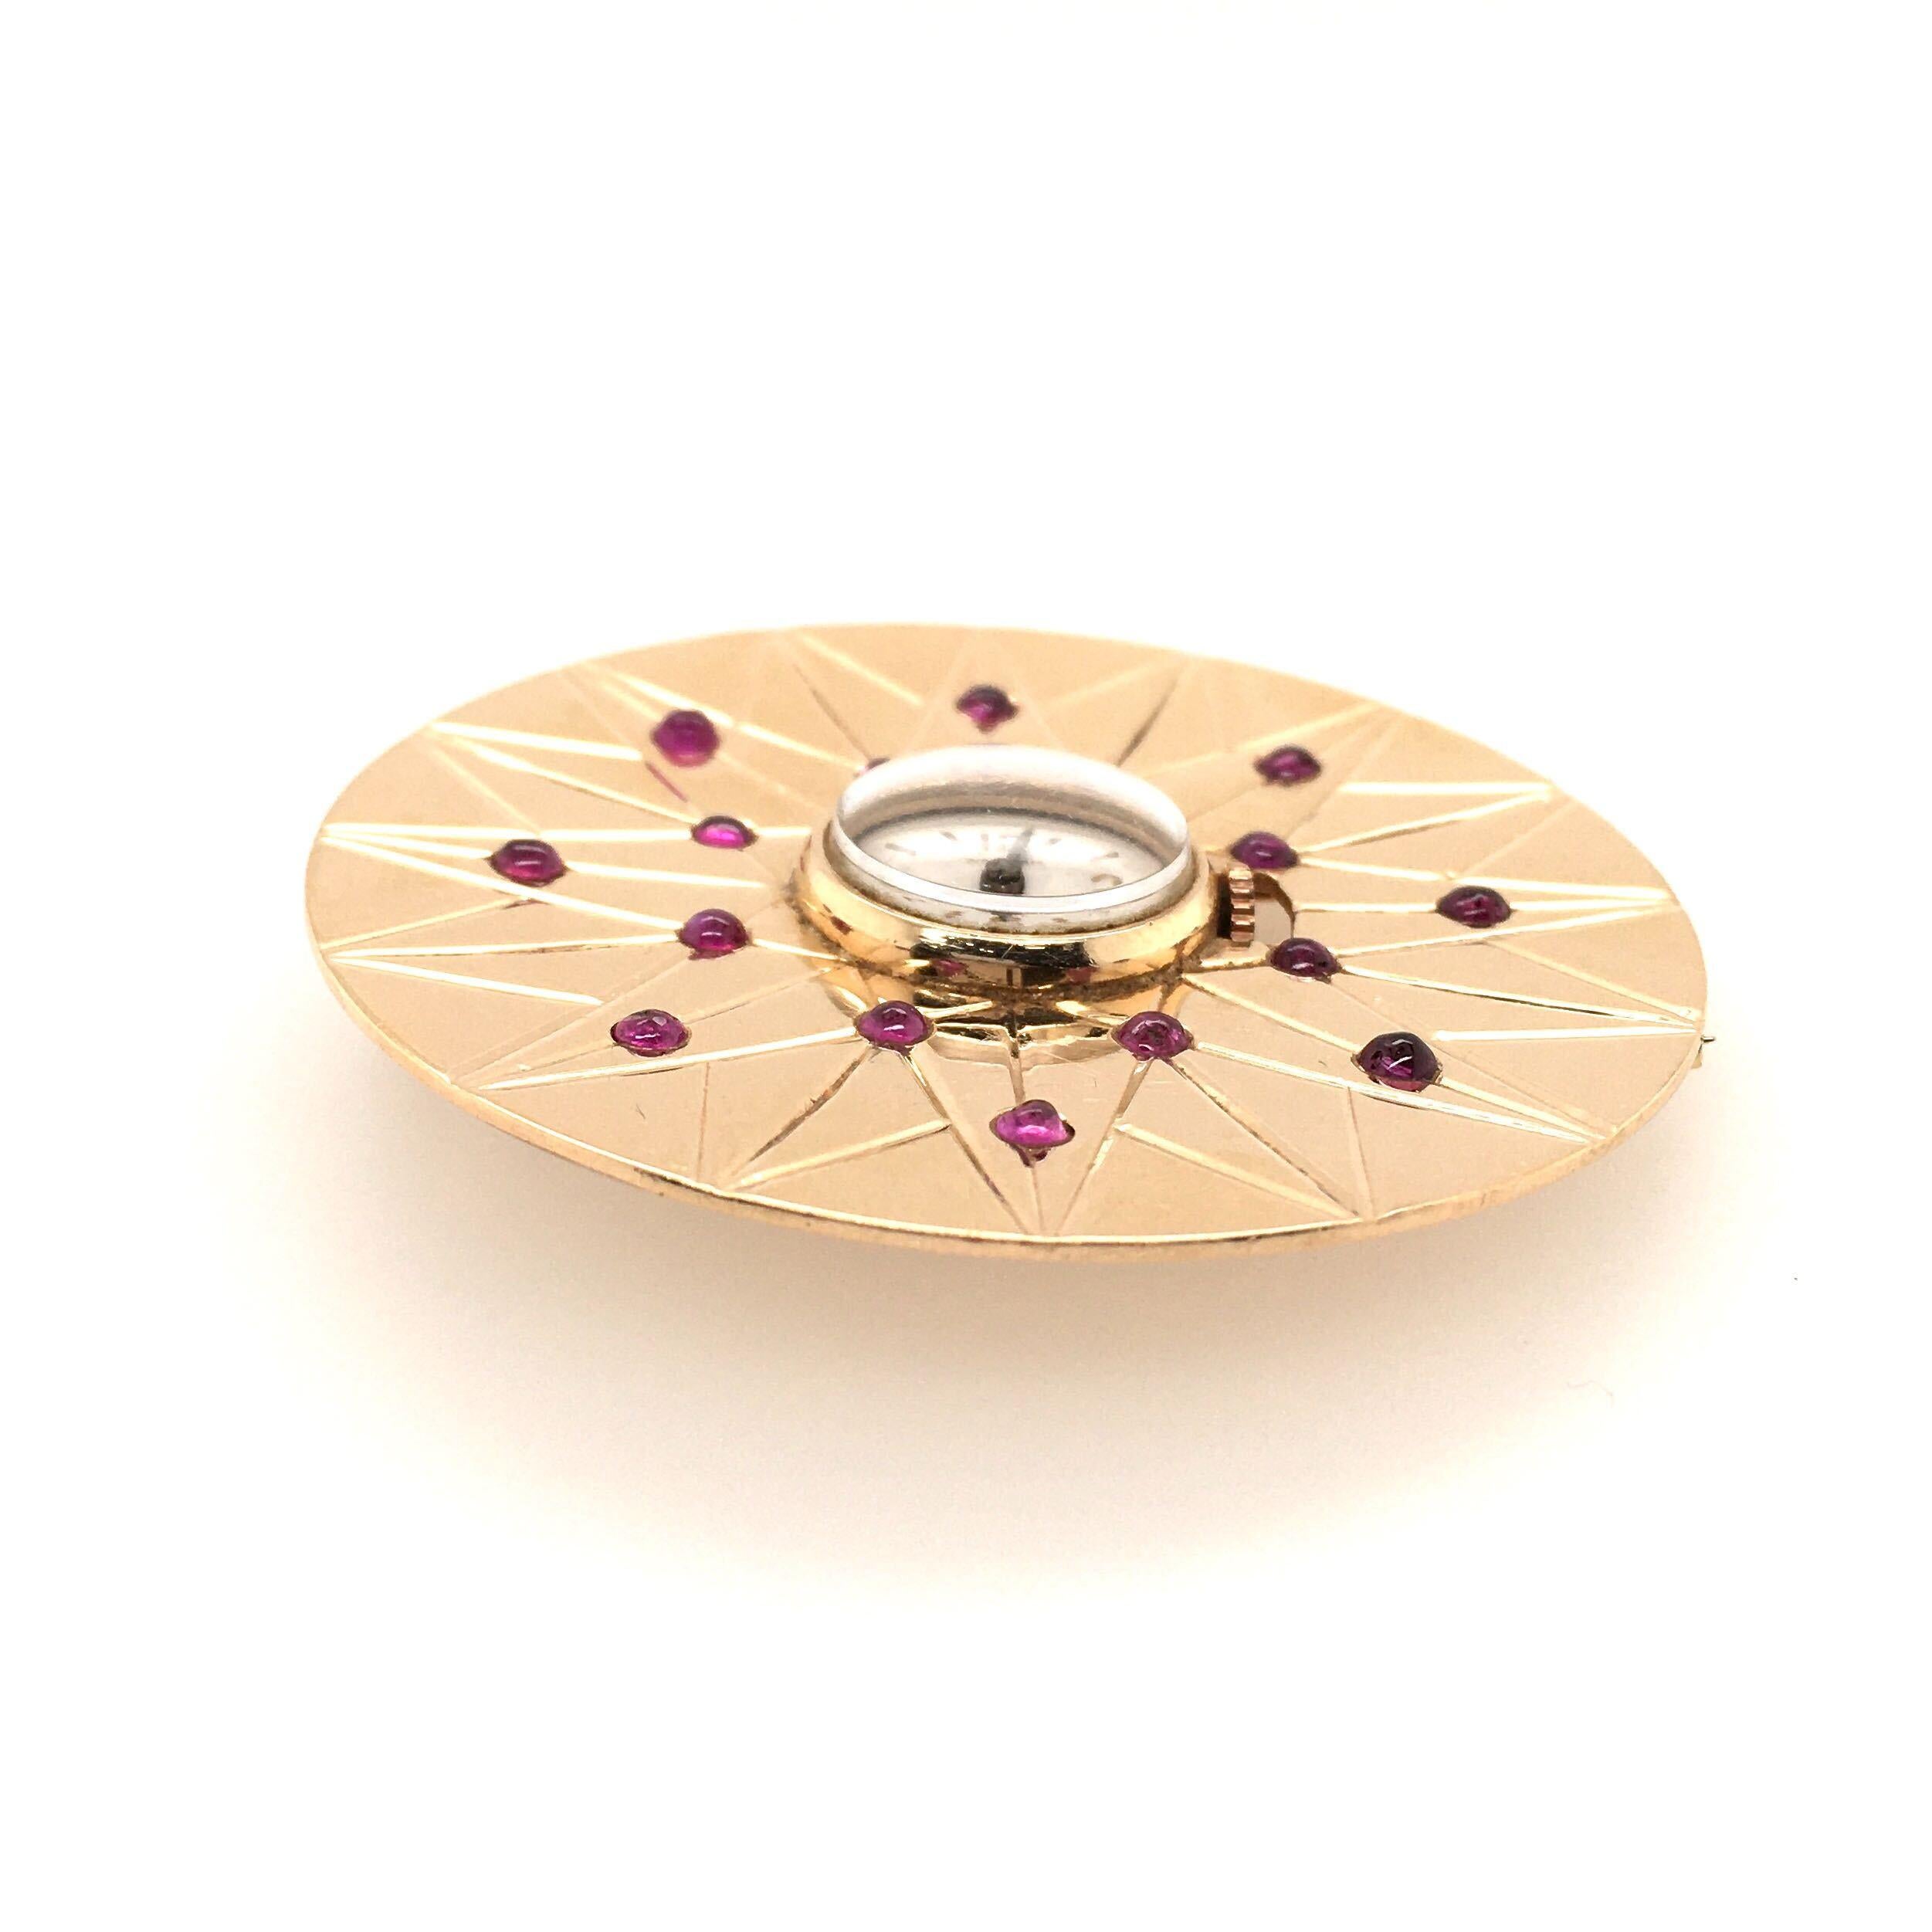 A 14 karat yellow gold and ruby watch brooch. Waltham. Circa 1940. Designed as a polished gold disc, decorated with a star motif, enhanced by small round cabochon rubies, centering a watch, of mechanical movement, 16.5mm, the white dial with Arabic